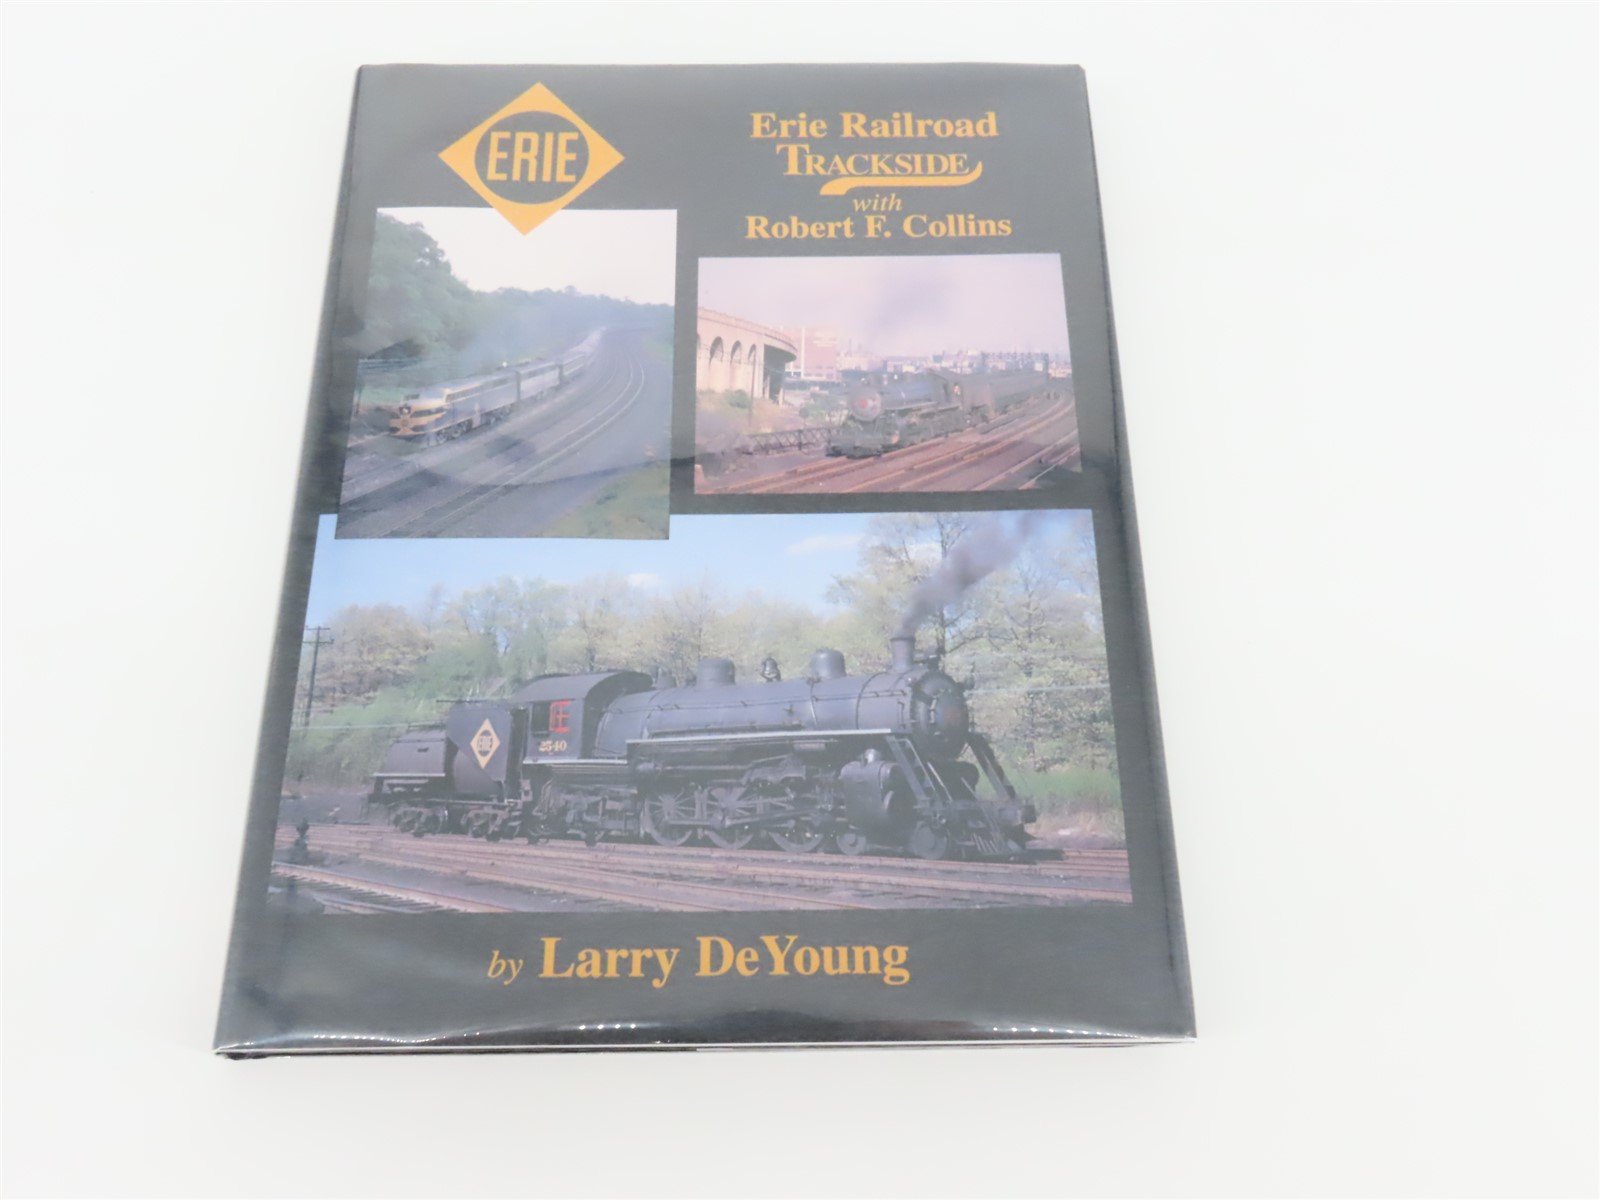 Morning Sun: Erie Railroad Trackside With Robert Collins by Larry DeYoung ©1998